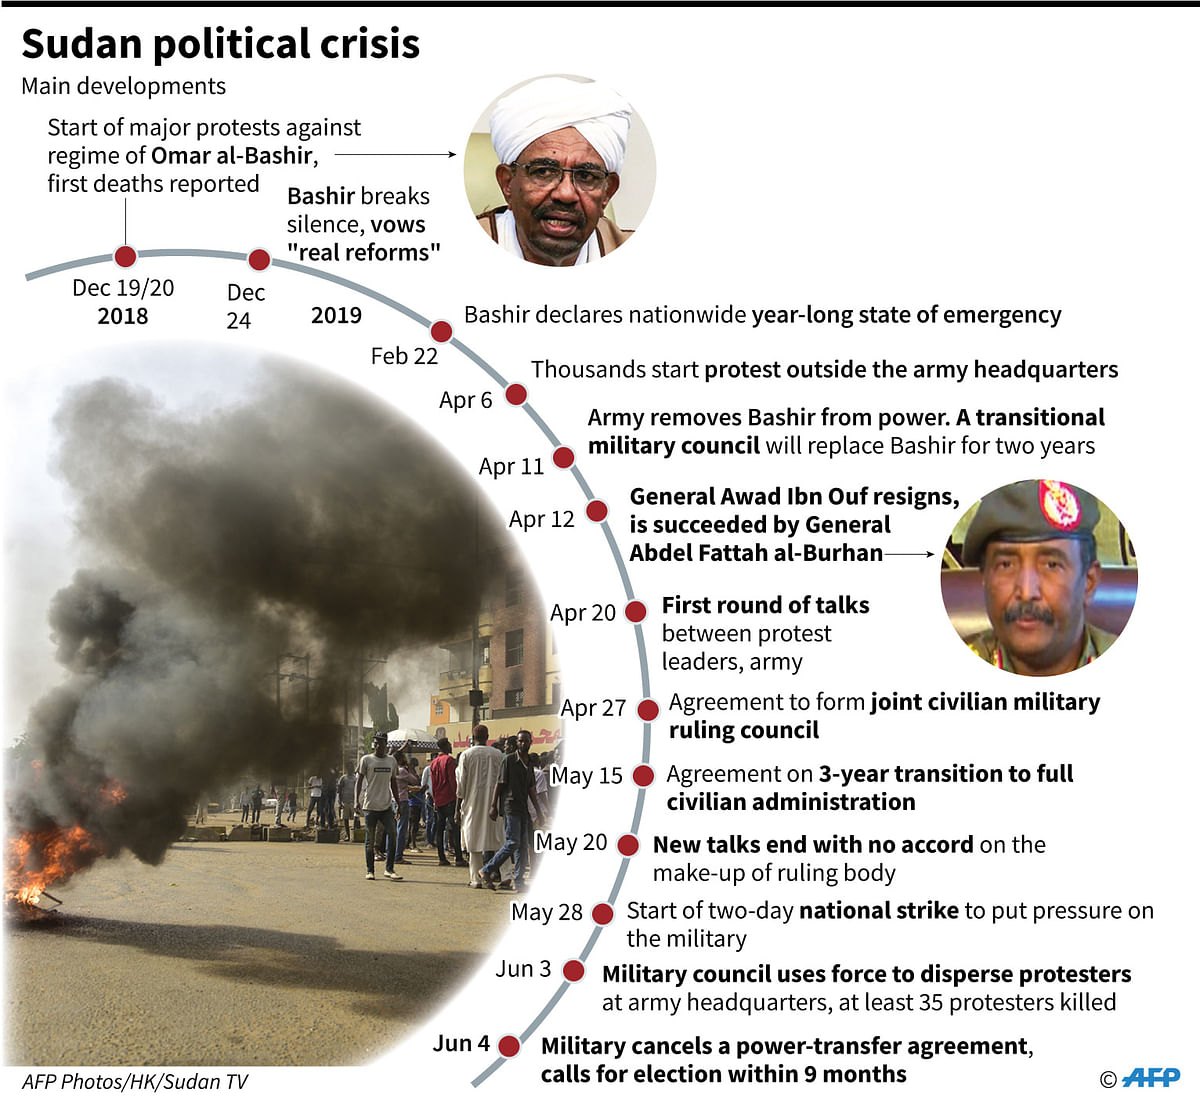 Chronology of main developments in Sudan`s political crisis.AFP File Photo